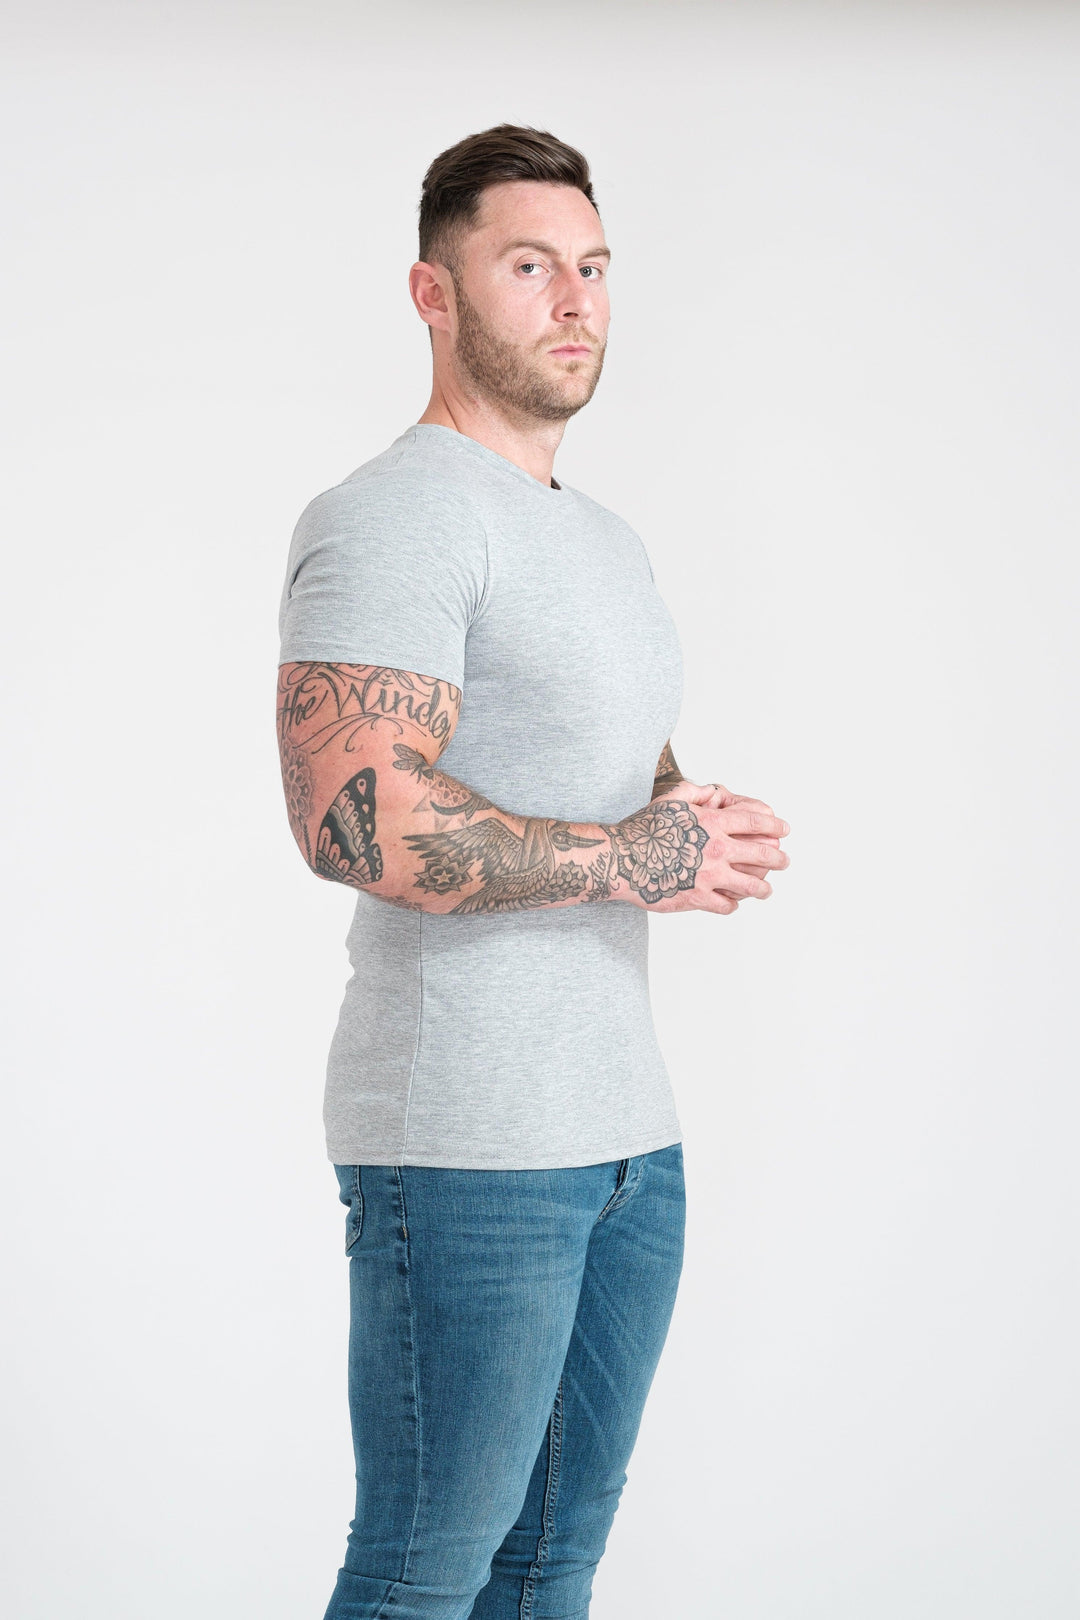 Grey Tapered Fit T-Shirt For Men. A Proportionally Fitted and Muscle Fit T-Shirt. Ideal for athletes.